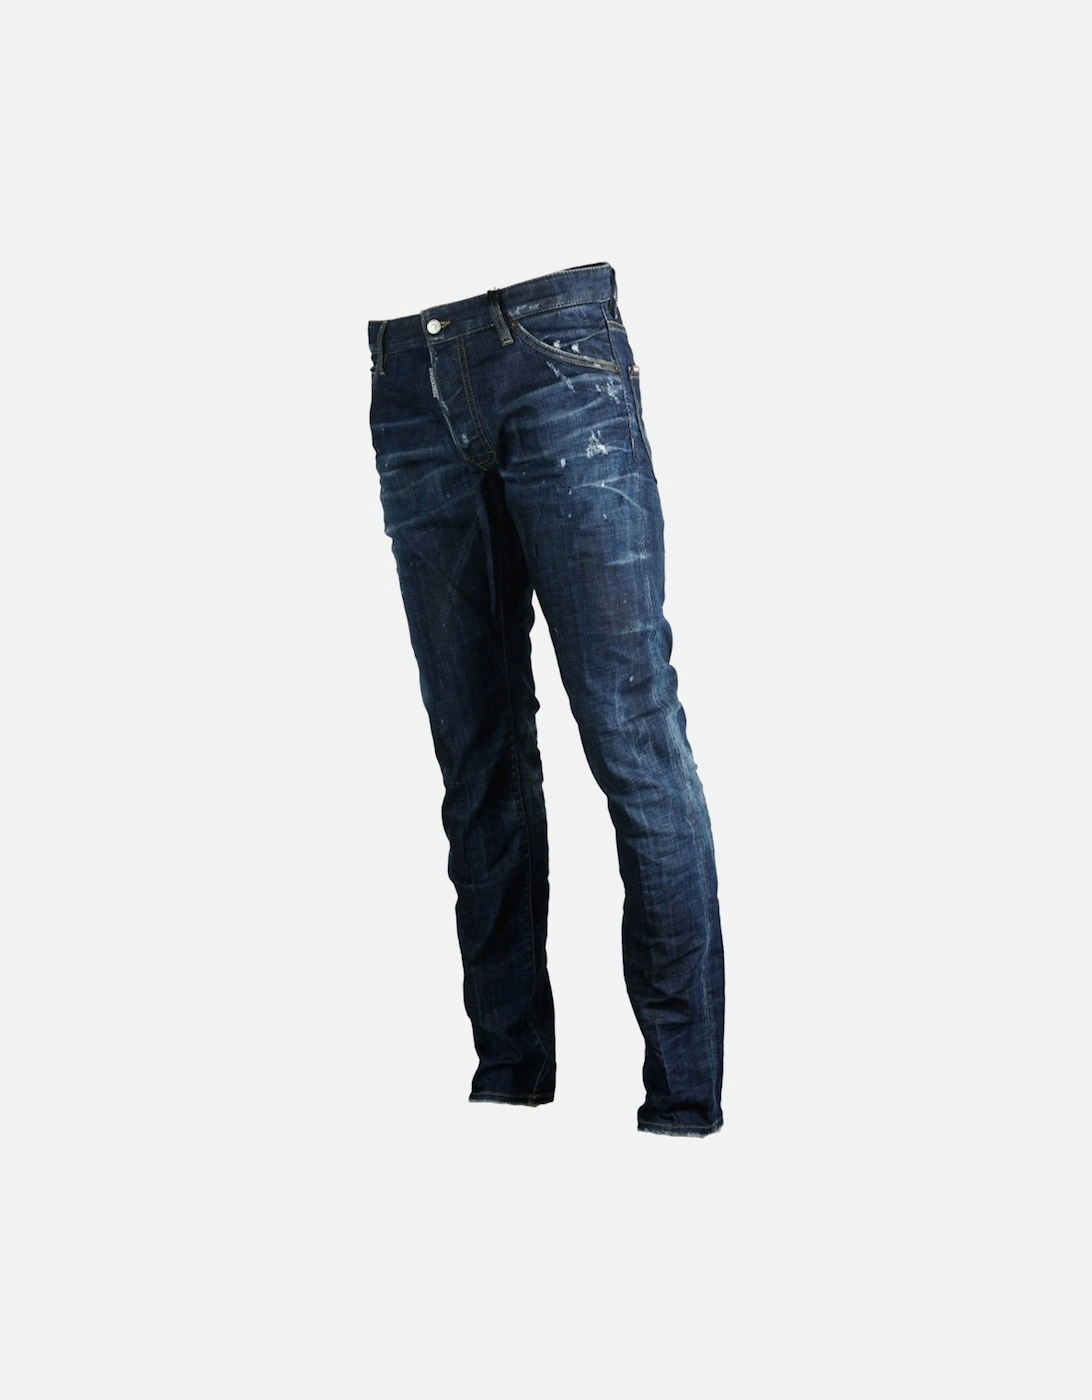 Cool Guy Jean Paint Spray Jeans